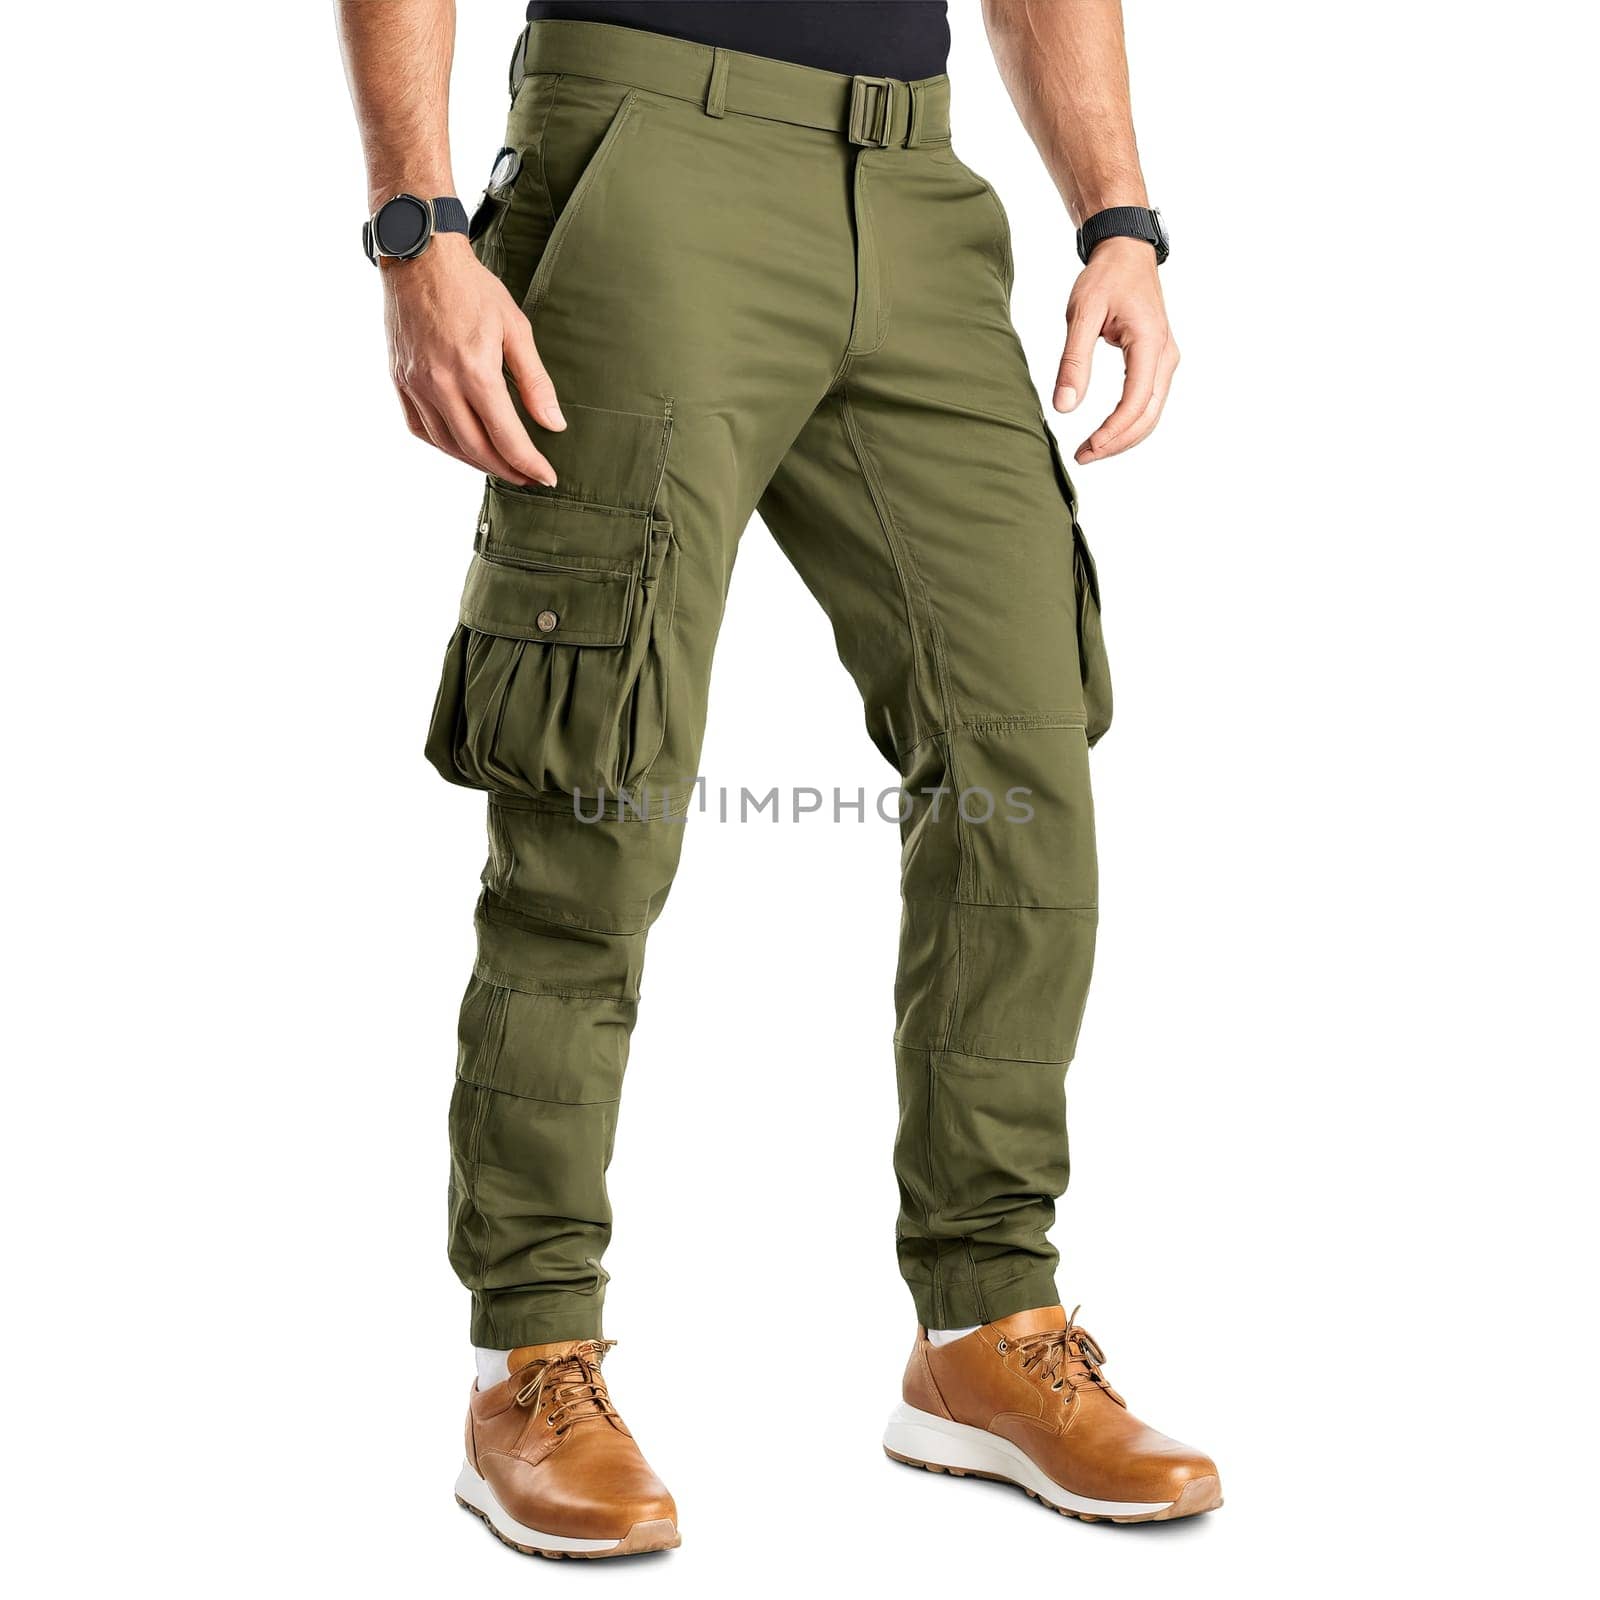 Stylish cargo pants in olive green with multiple pockets and a tapered leg levitating Mockup by panophotograph